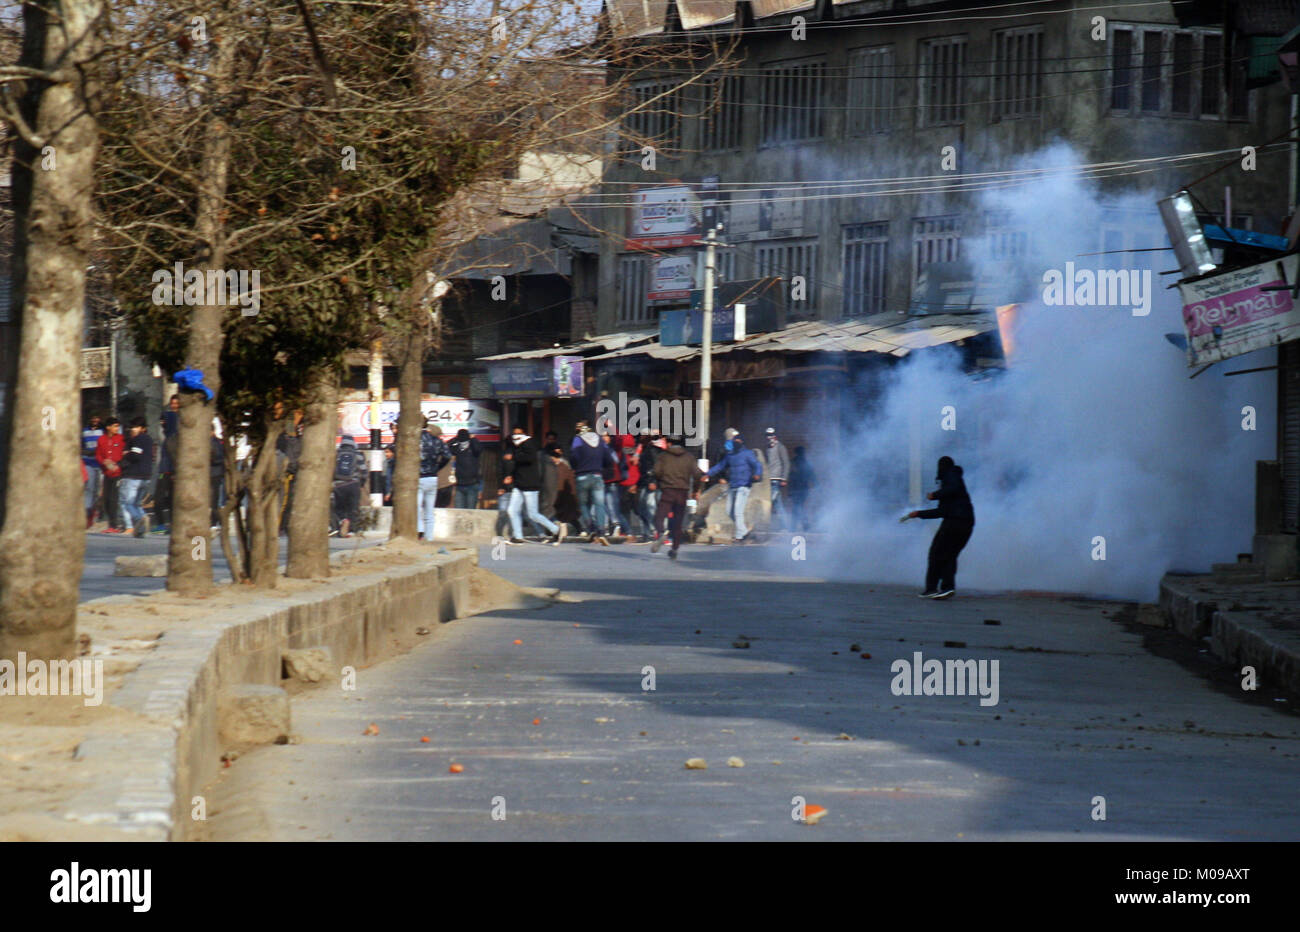 Srinagar.KASHMIR19. JANUARY A masked Kashmiri protester tryig to throwback exploded tear gas shell during a protest after friday prayers Indian forces used tear gas and pellet guns to disperse hundreds of stone-throwing protesters who were protesting against National Investigation Agency (NIA) chargesheet.Hafiz Lashkar-e-Taiba (LeT) Hizb-ul-Mujahideen, Syed Salahuddin and 10 accused: 7 separatists, 1 businessman, 2 stone pelters Credit: Sofi Suhail/Alamy Live News Stock Photo